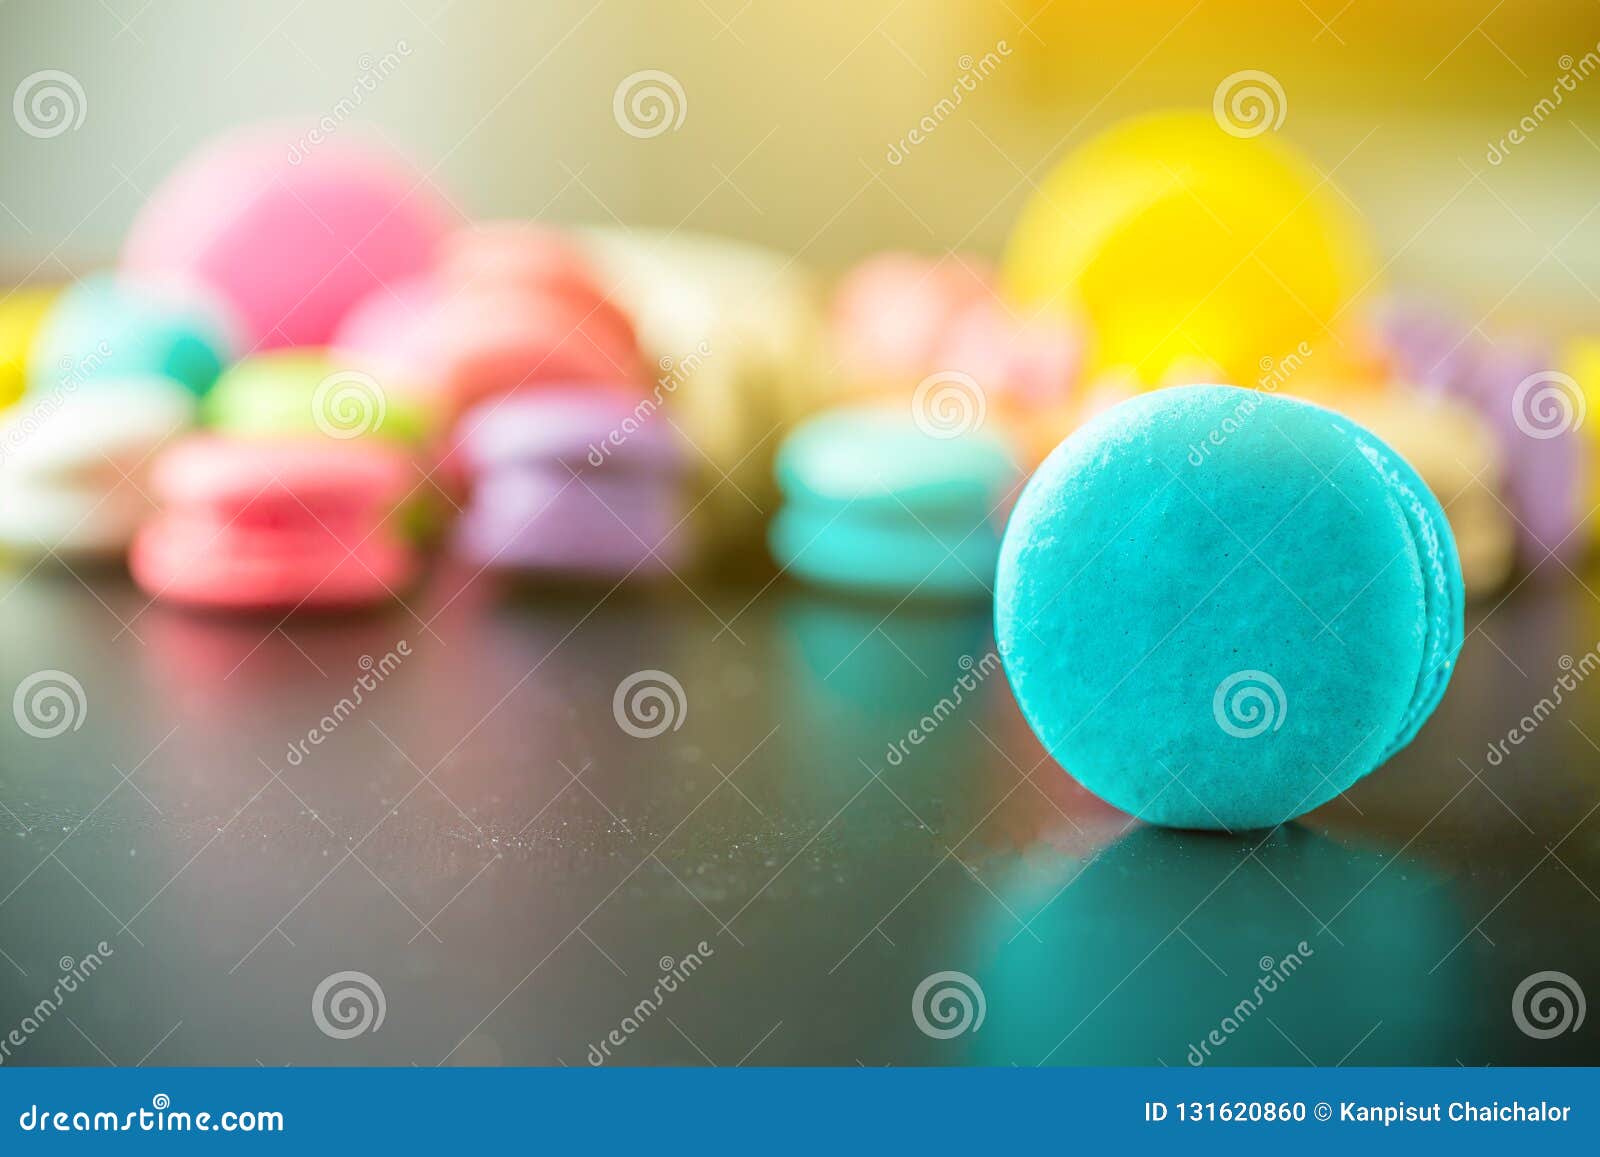 Top View Colorful Macarons Dessert with Vintage Pastel Tones. Stock ...